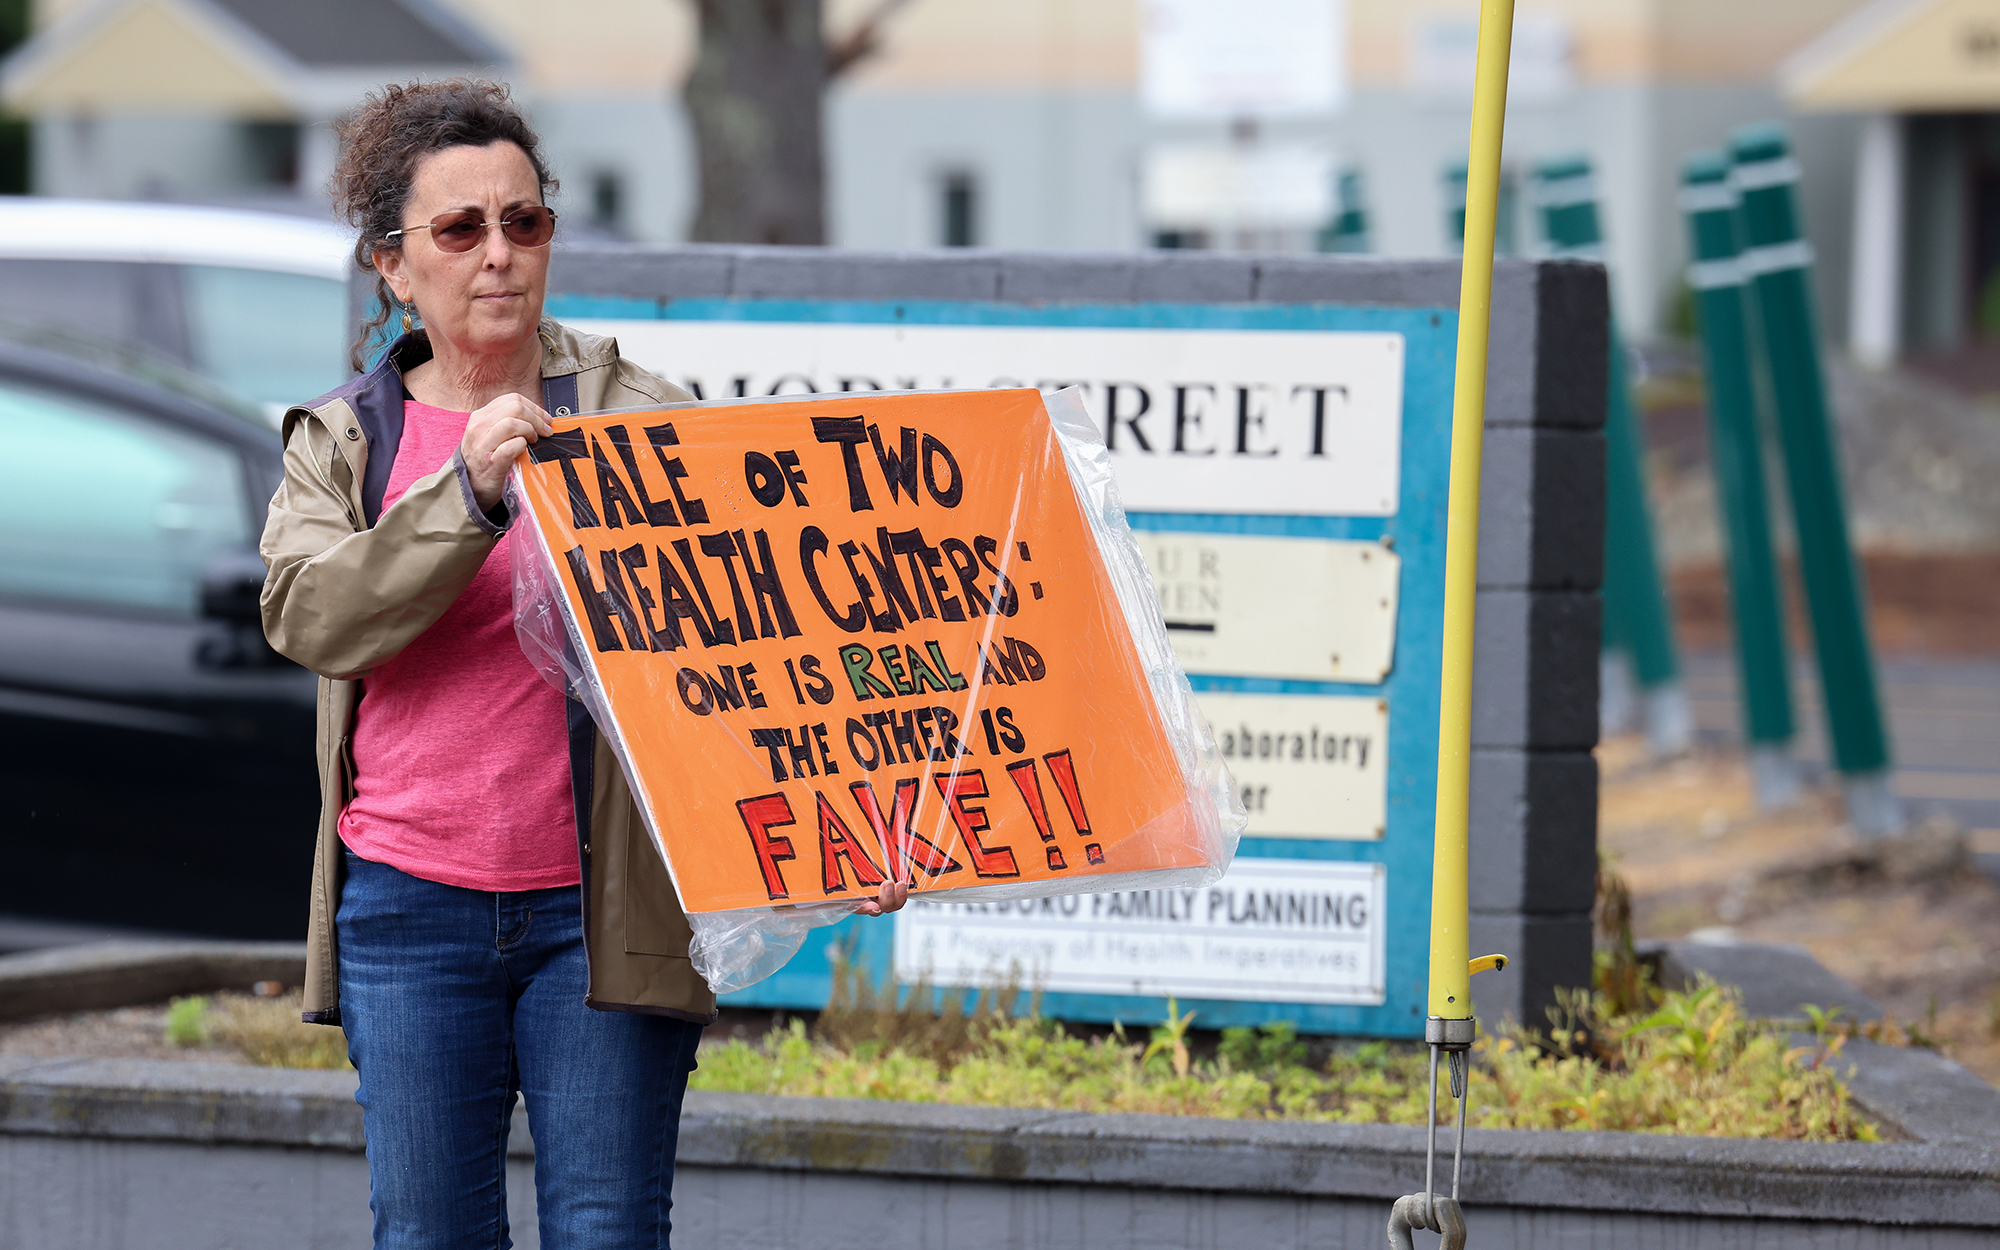 Laurie Veninger, with Indivisible Mass Coalition, demonstrates outside Abundant Hope Pregnancy Resource Center during an open house at the anti-abortion counseling center on June 17, 2023. The center in Attleboro, Massachusetts, is located next to an abortion clinic. (Photo by Trilce Estrada Olvera/News21)